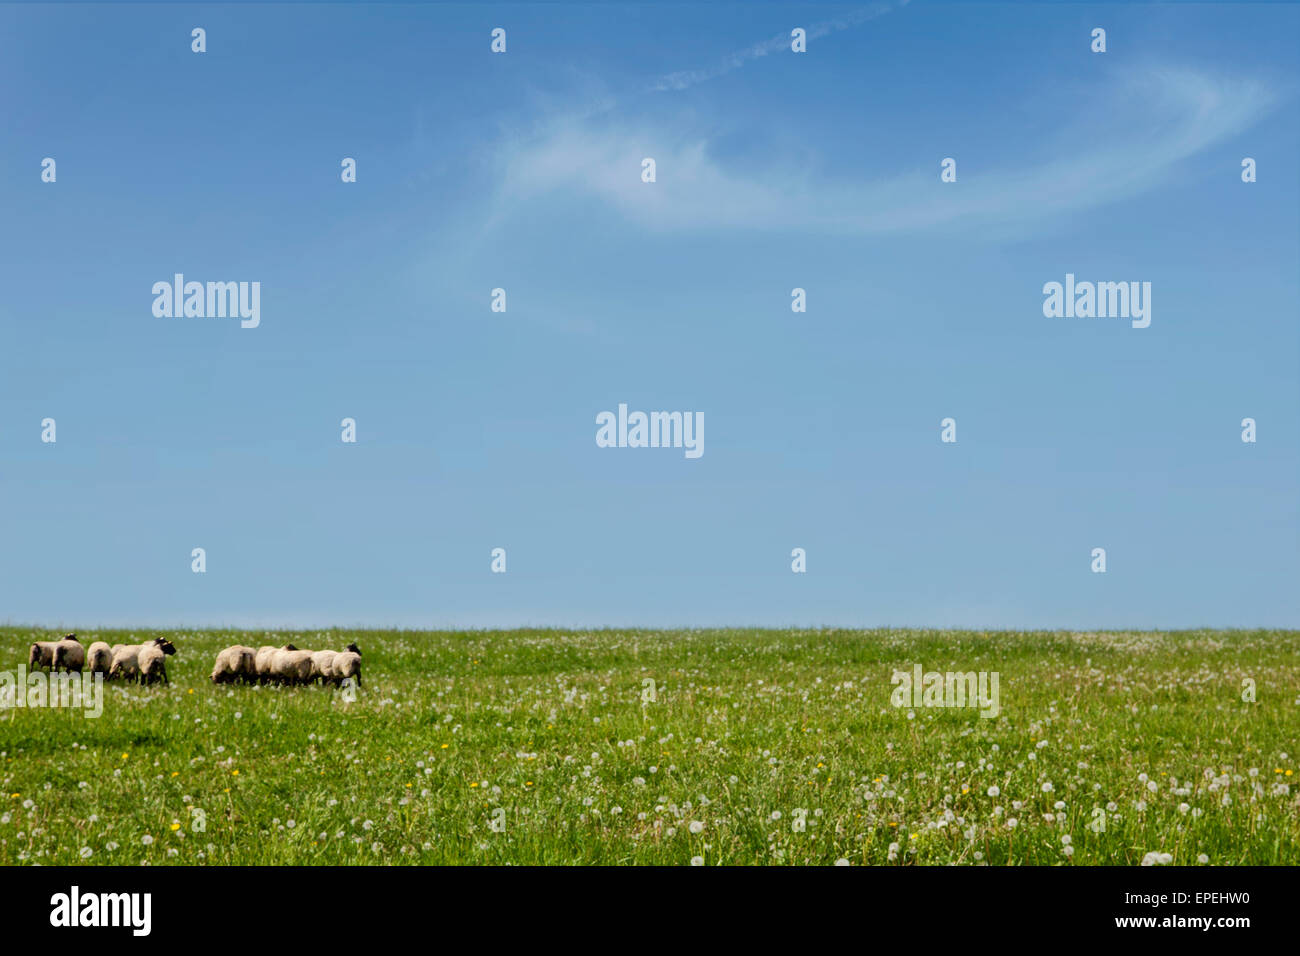 Traditional farming. Sheep herd on green grass on blue sky summer day. Beautiful rural scenery. Stock Photo